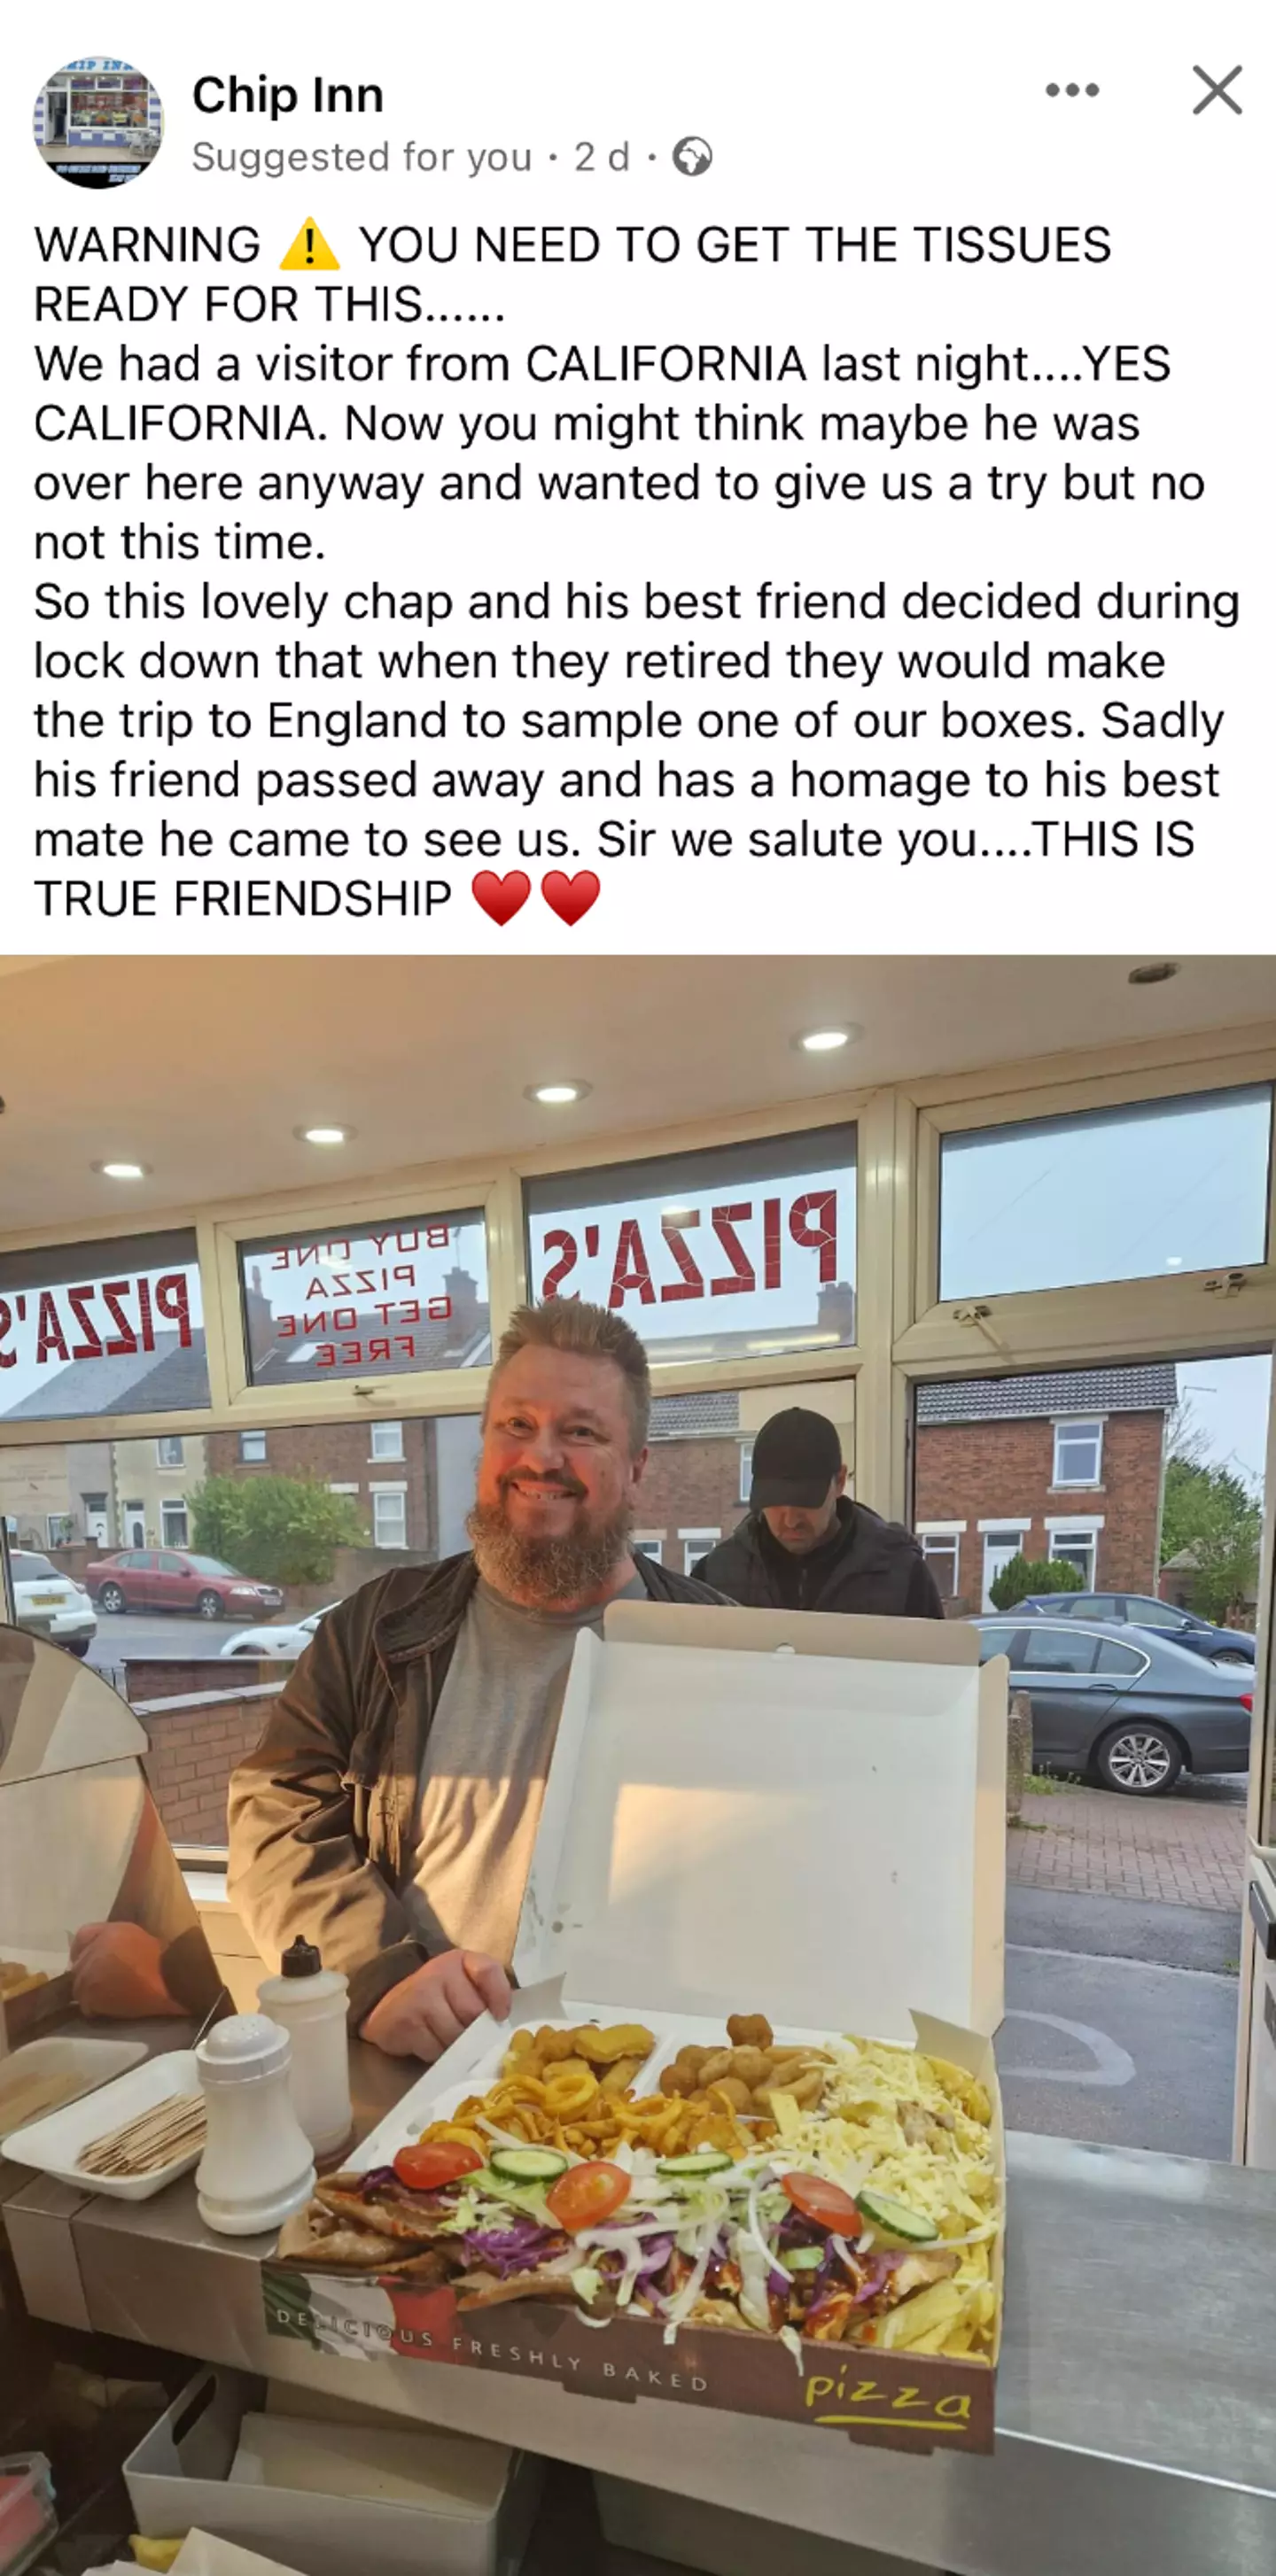 The fast food place shared one customer's incredible journey for the food. (Facebook/Chip Inn)